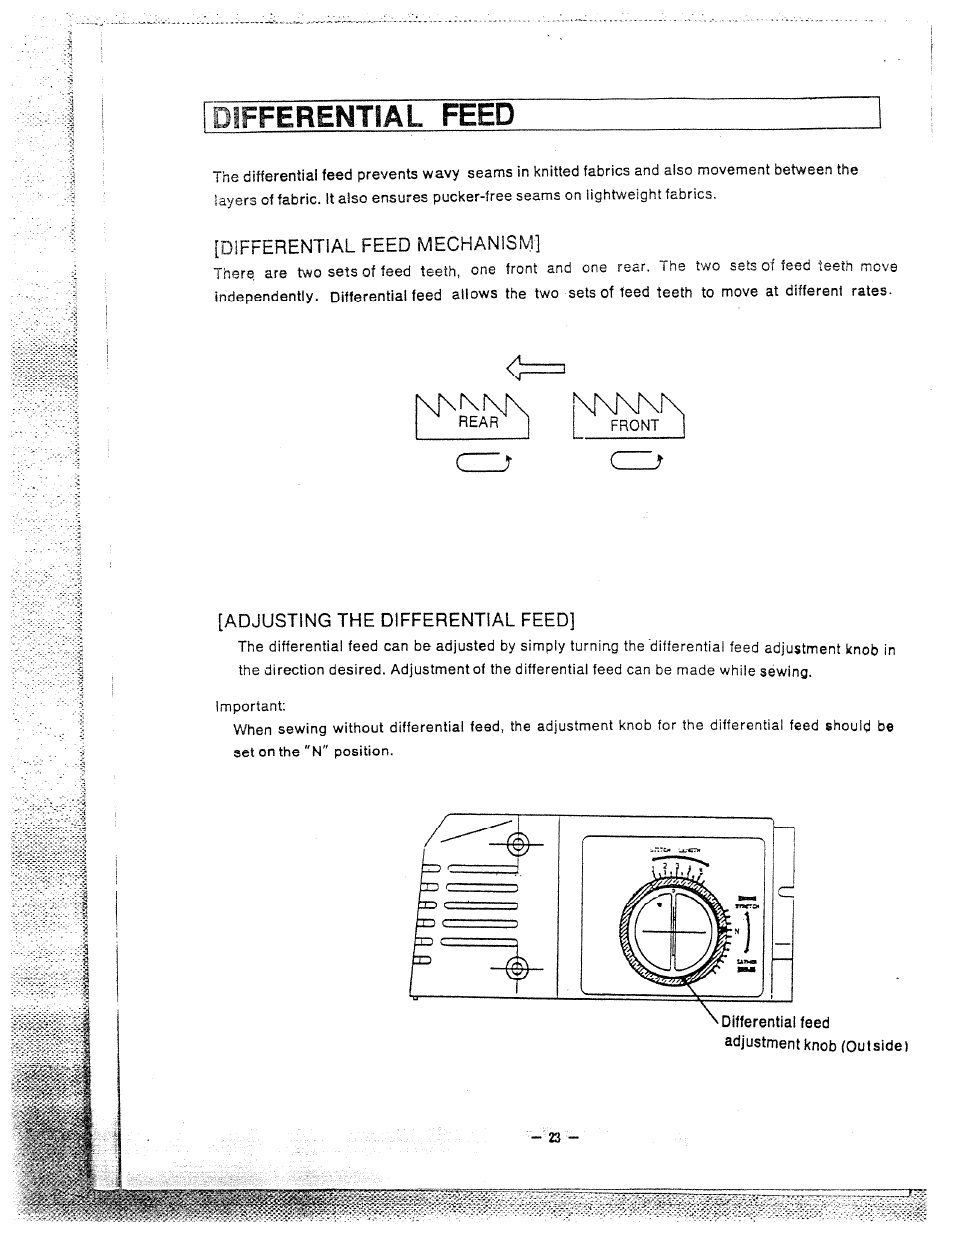 Differential feed, Differential feed -24, Nm\k | SINGER W1600 User Manual | Page 24 / 28